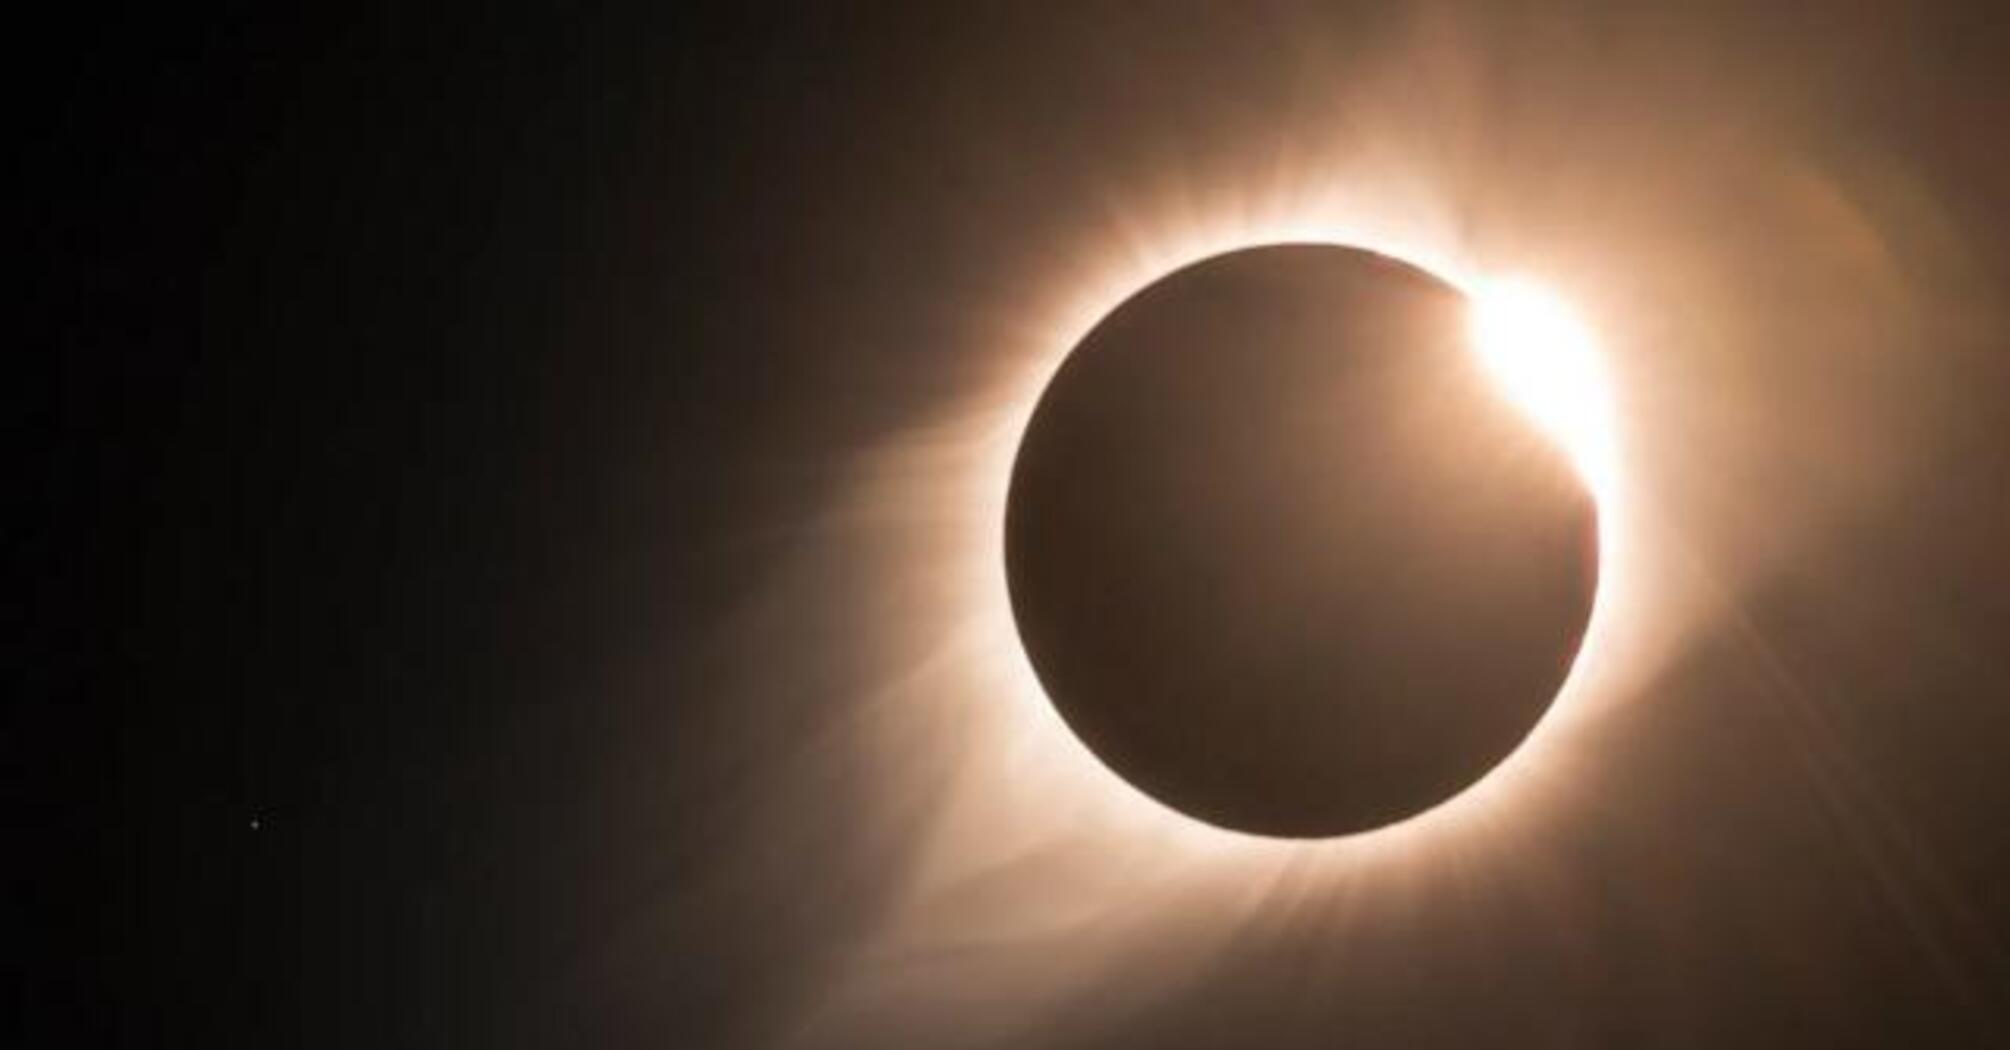 Scientists have studied how a solar eclipse affects the psyche of people